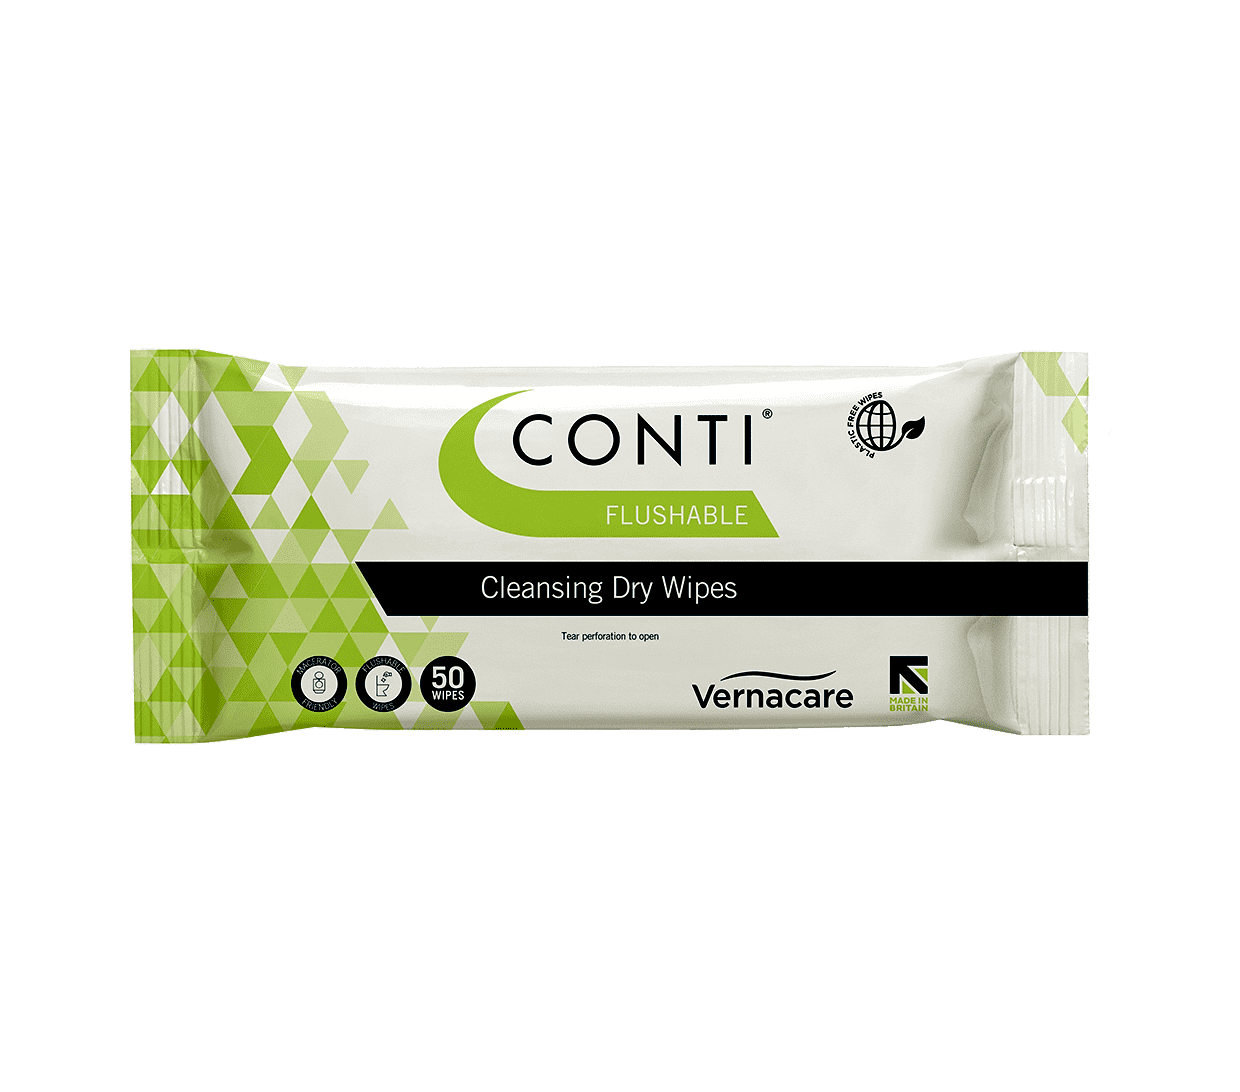 Conti Flushable Dry Wipes